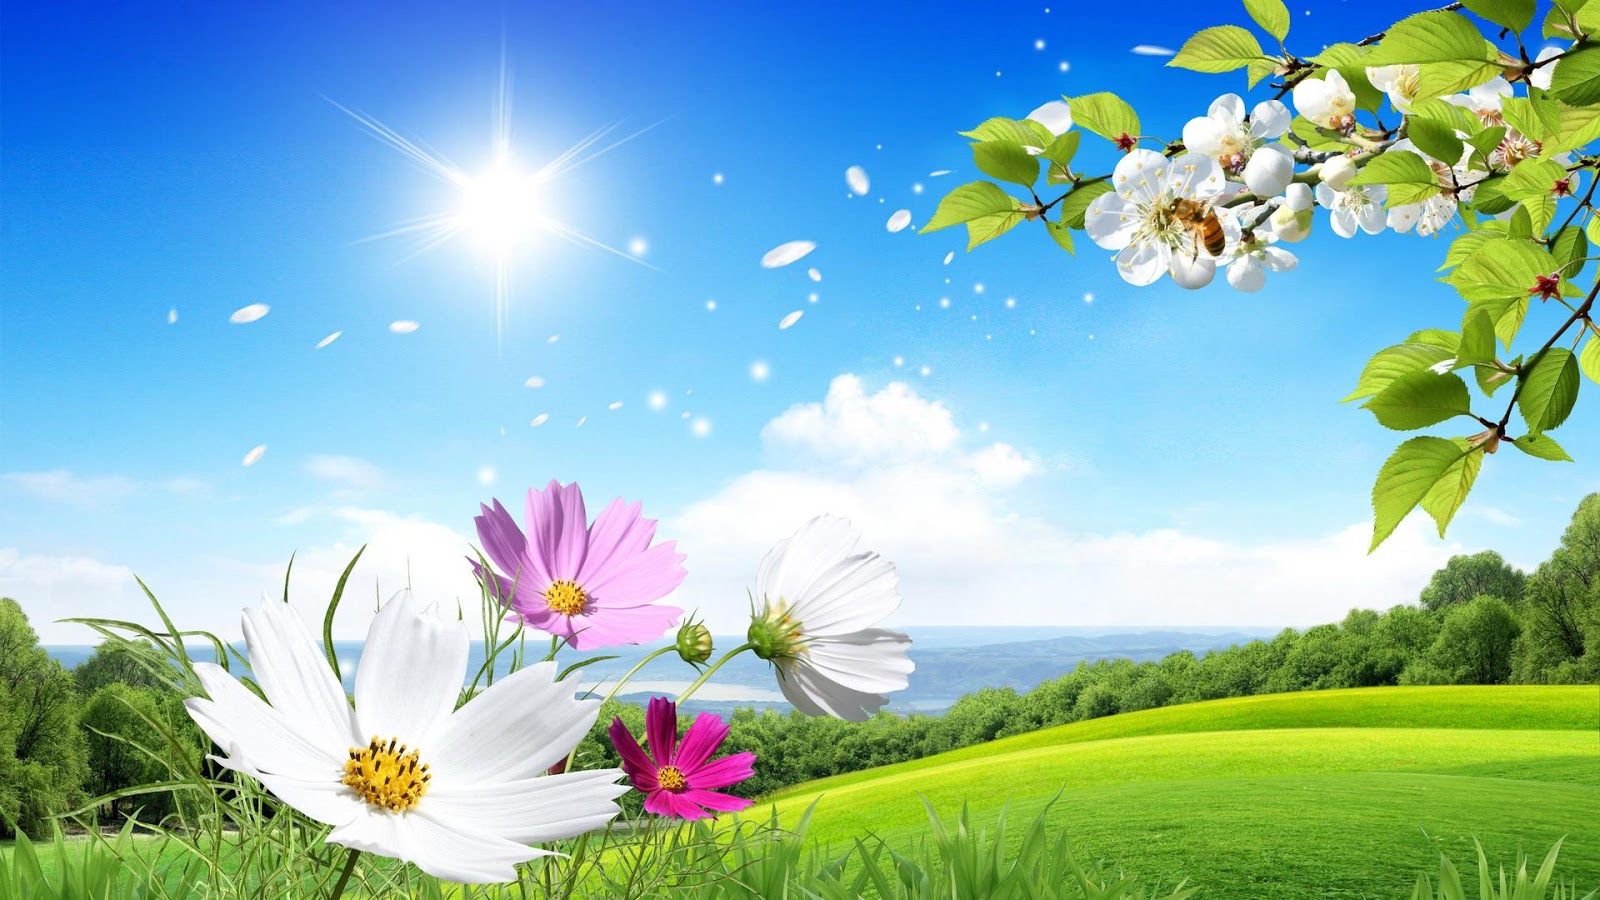 flowers for flower lovers.: Flowers wallpapers natural sceneries.